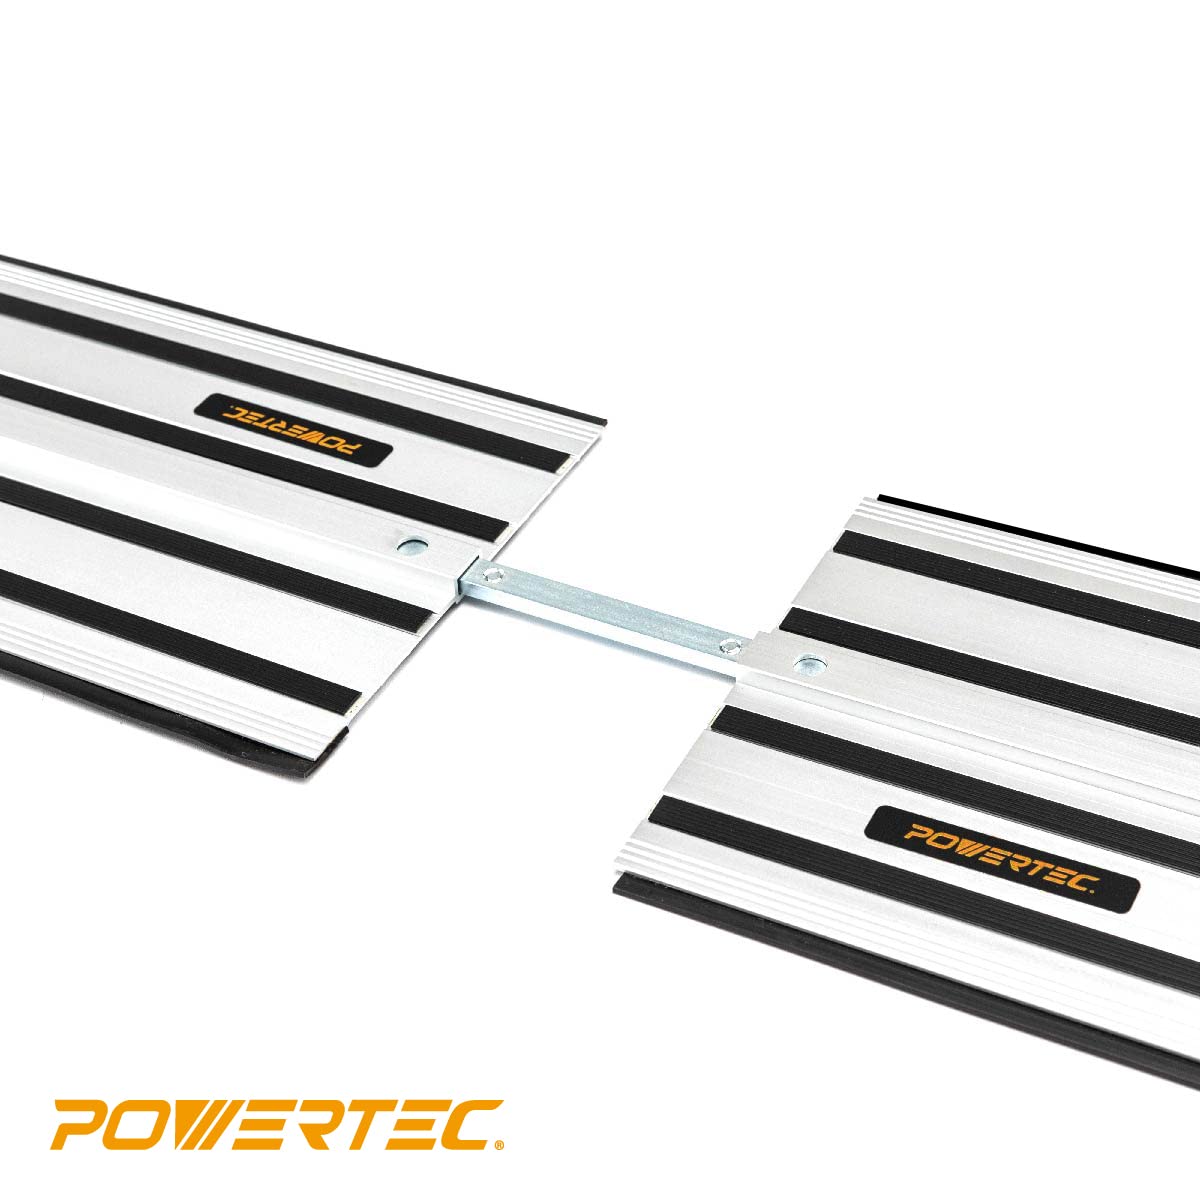 POWERTEC 71691 110 Inch Track Saw Guide Rail Connector Set for DeWalt Track Saws, Clamping Options Includes 2x55" Aluminum Extruded Guided Rails and